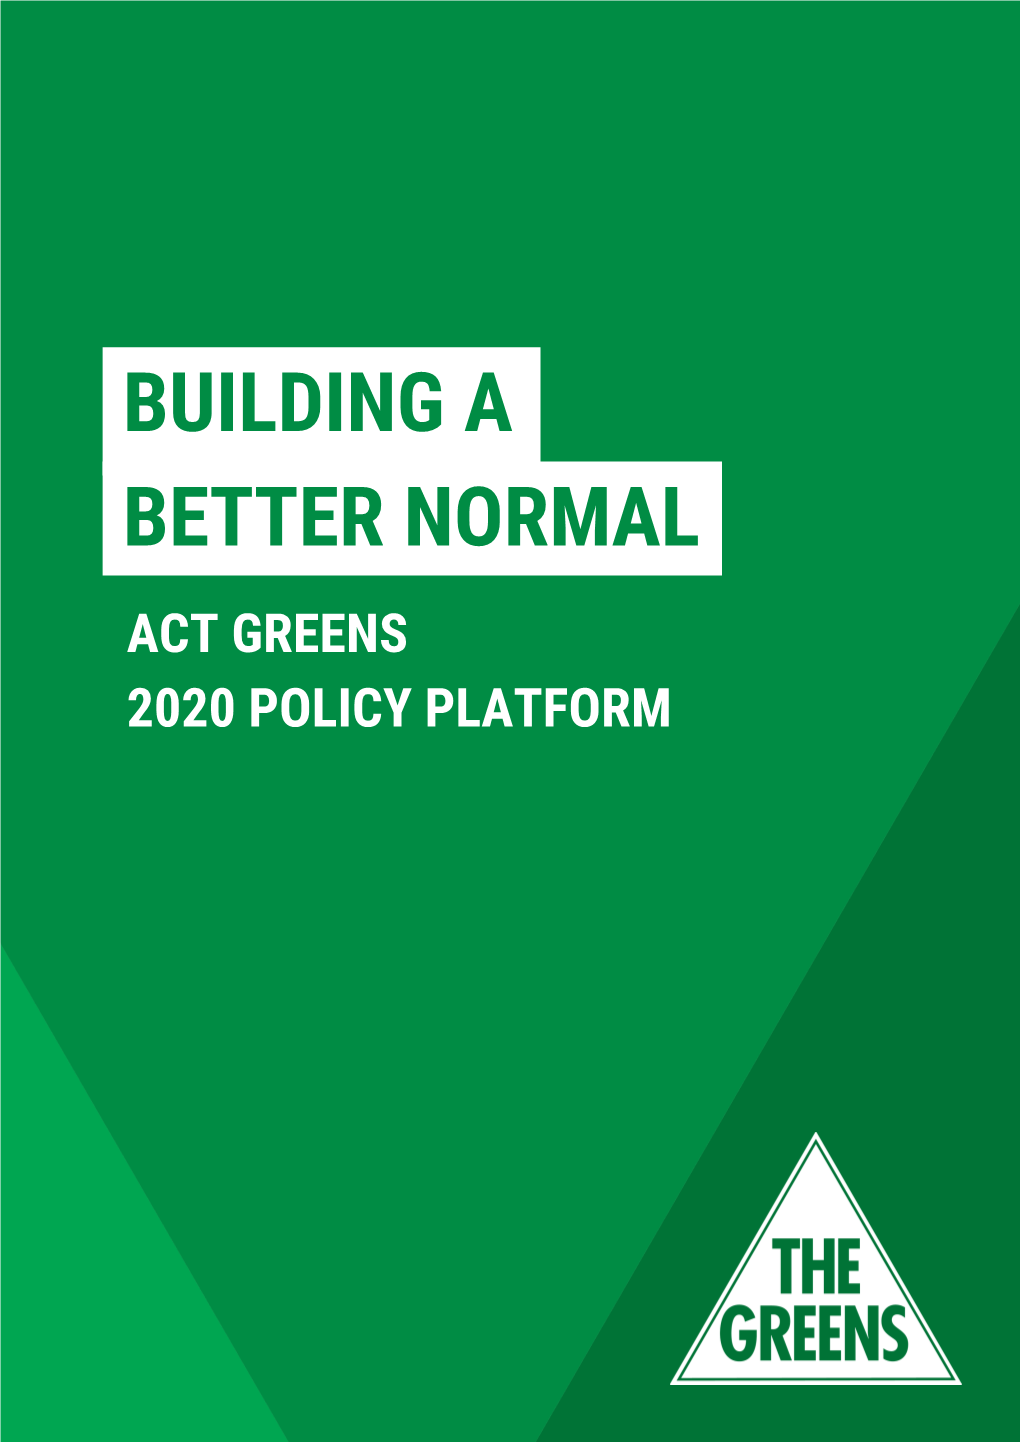 Building a Better Normal Act Greens 2020 Policy Platform